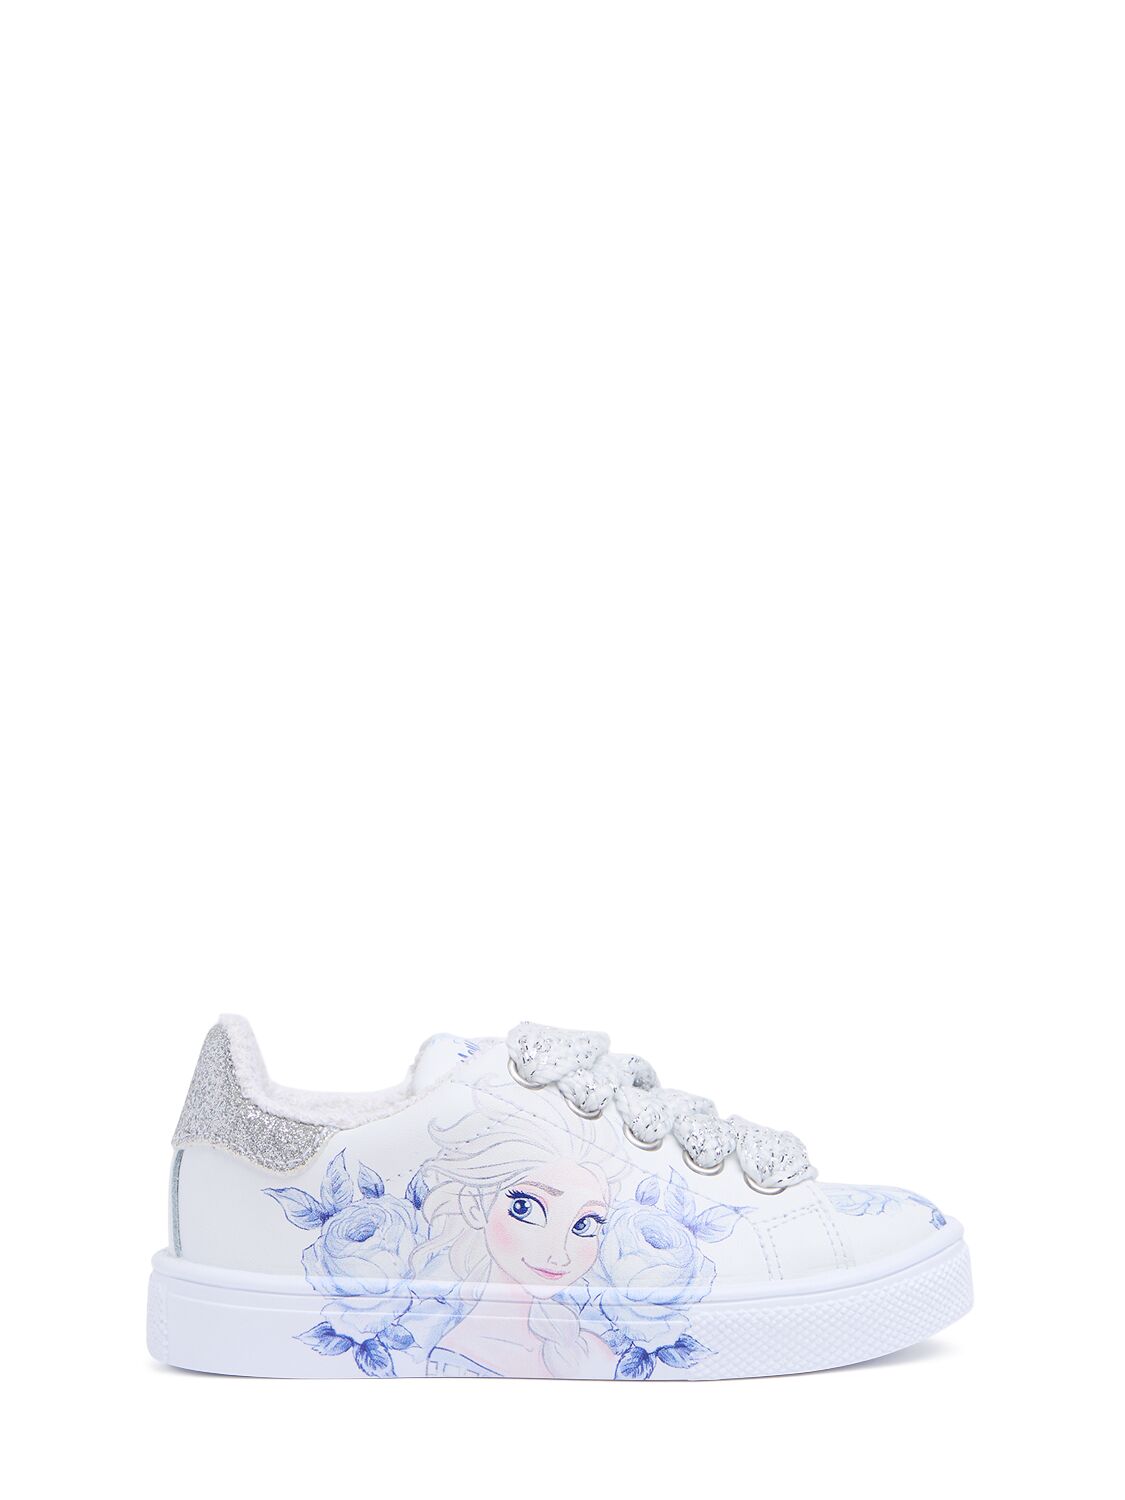 Monnalisa Frozen Print Leather Lace-up Sneakers In White/blue